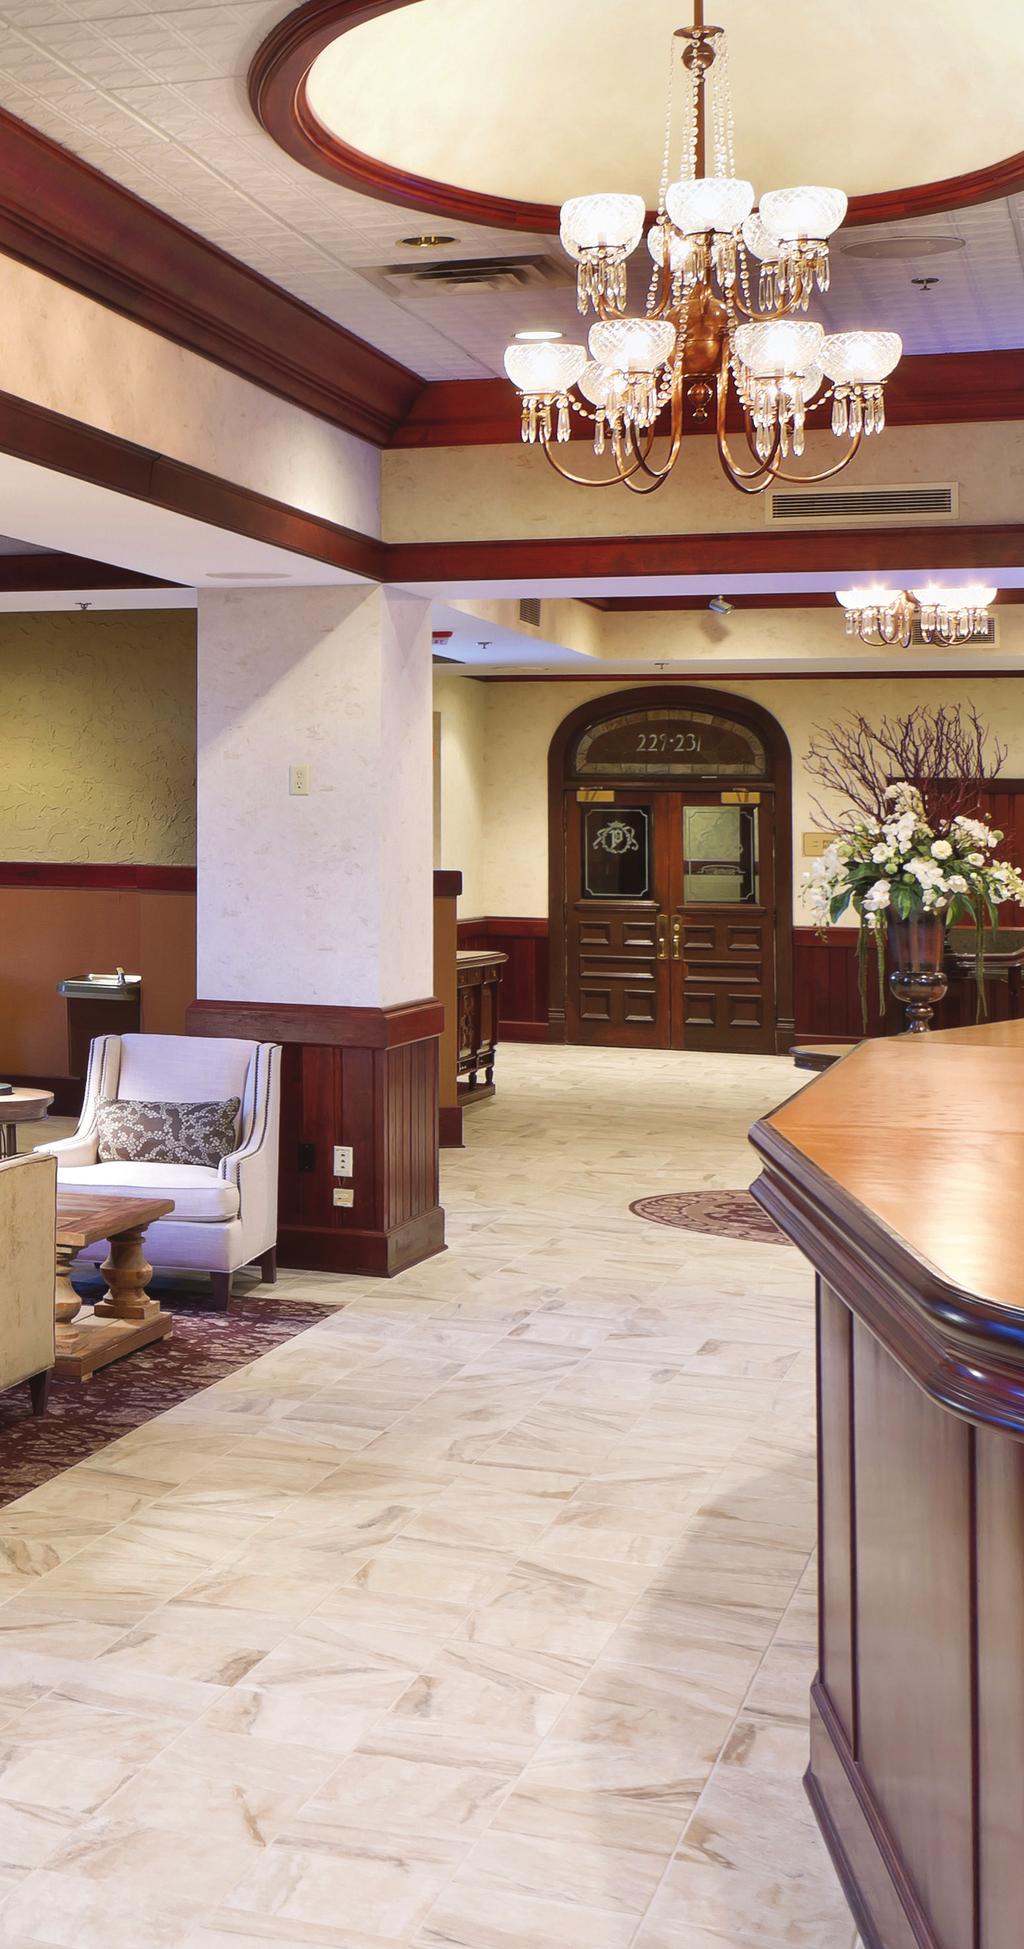 Whether you are traveling for business or pleasure, the Park Place Hotel offers the best of it all!